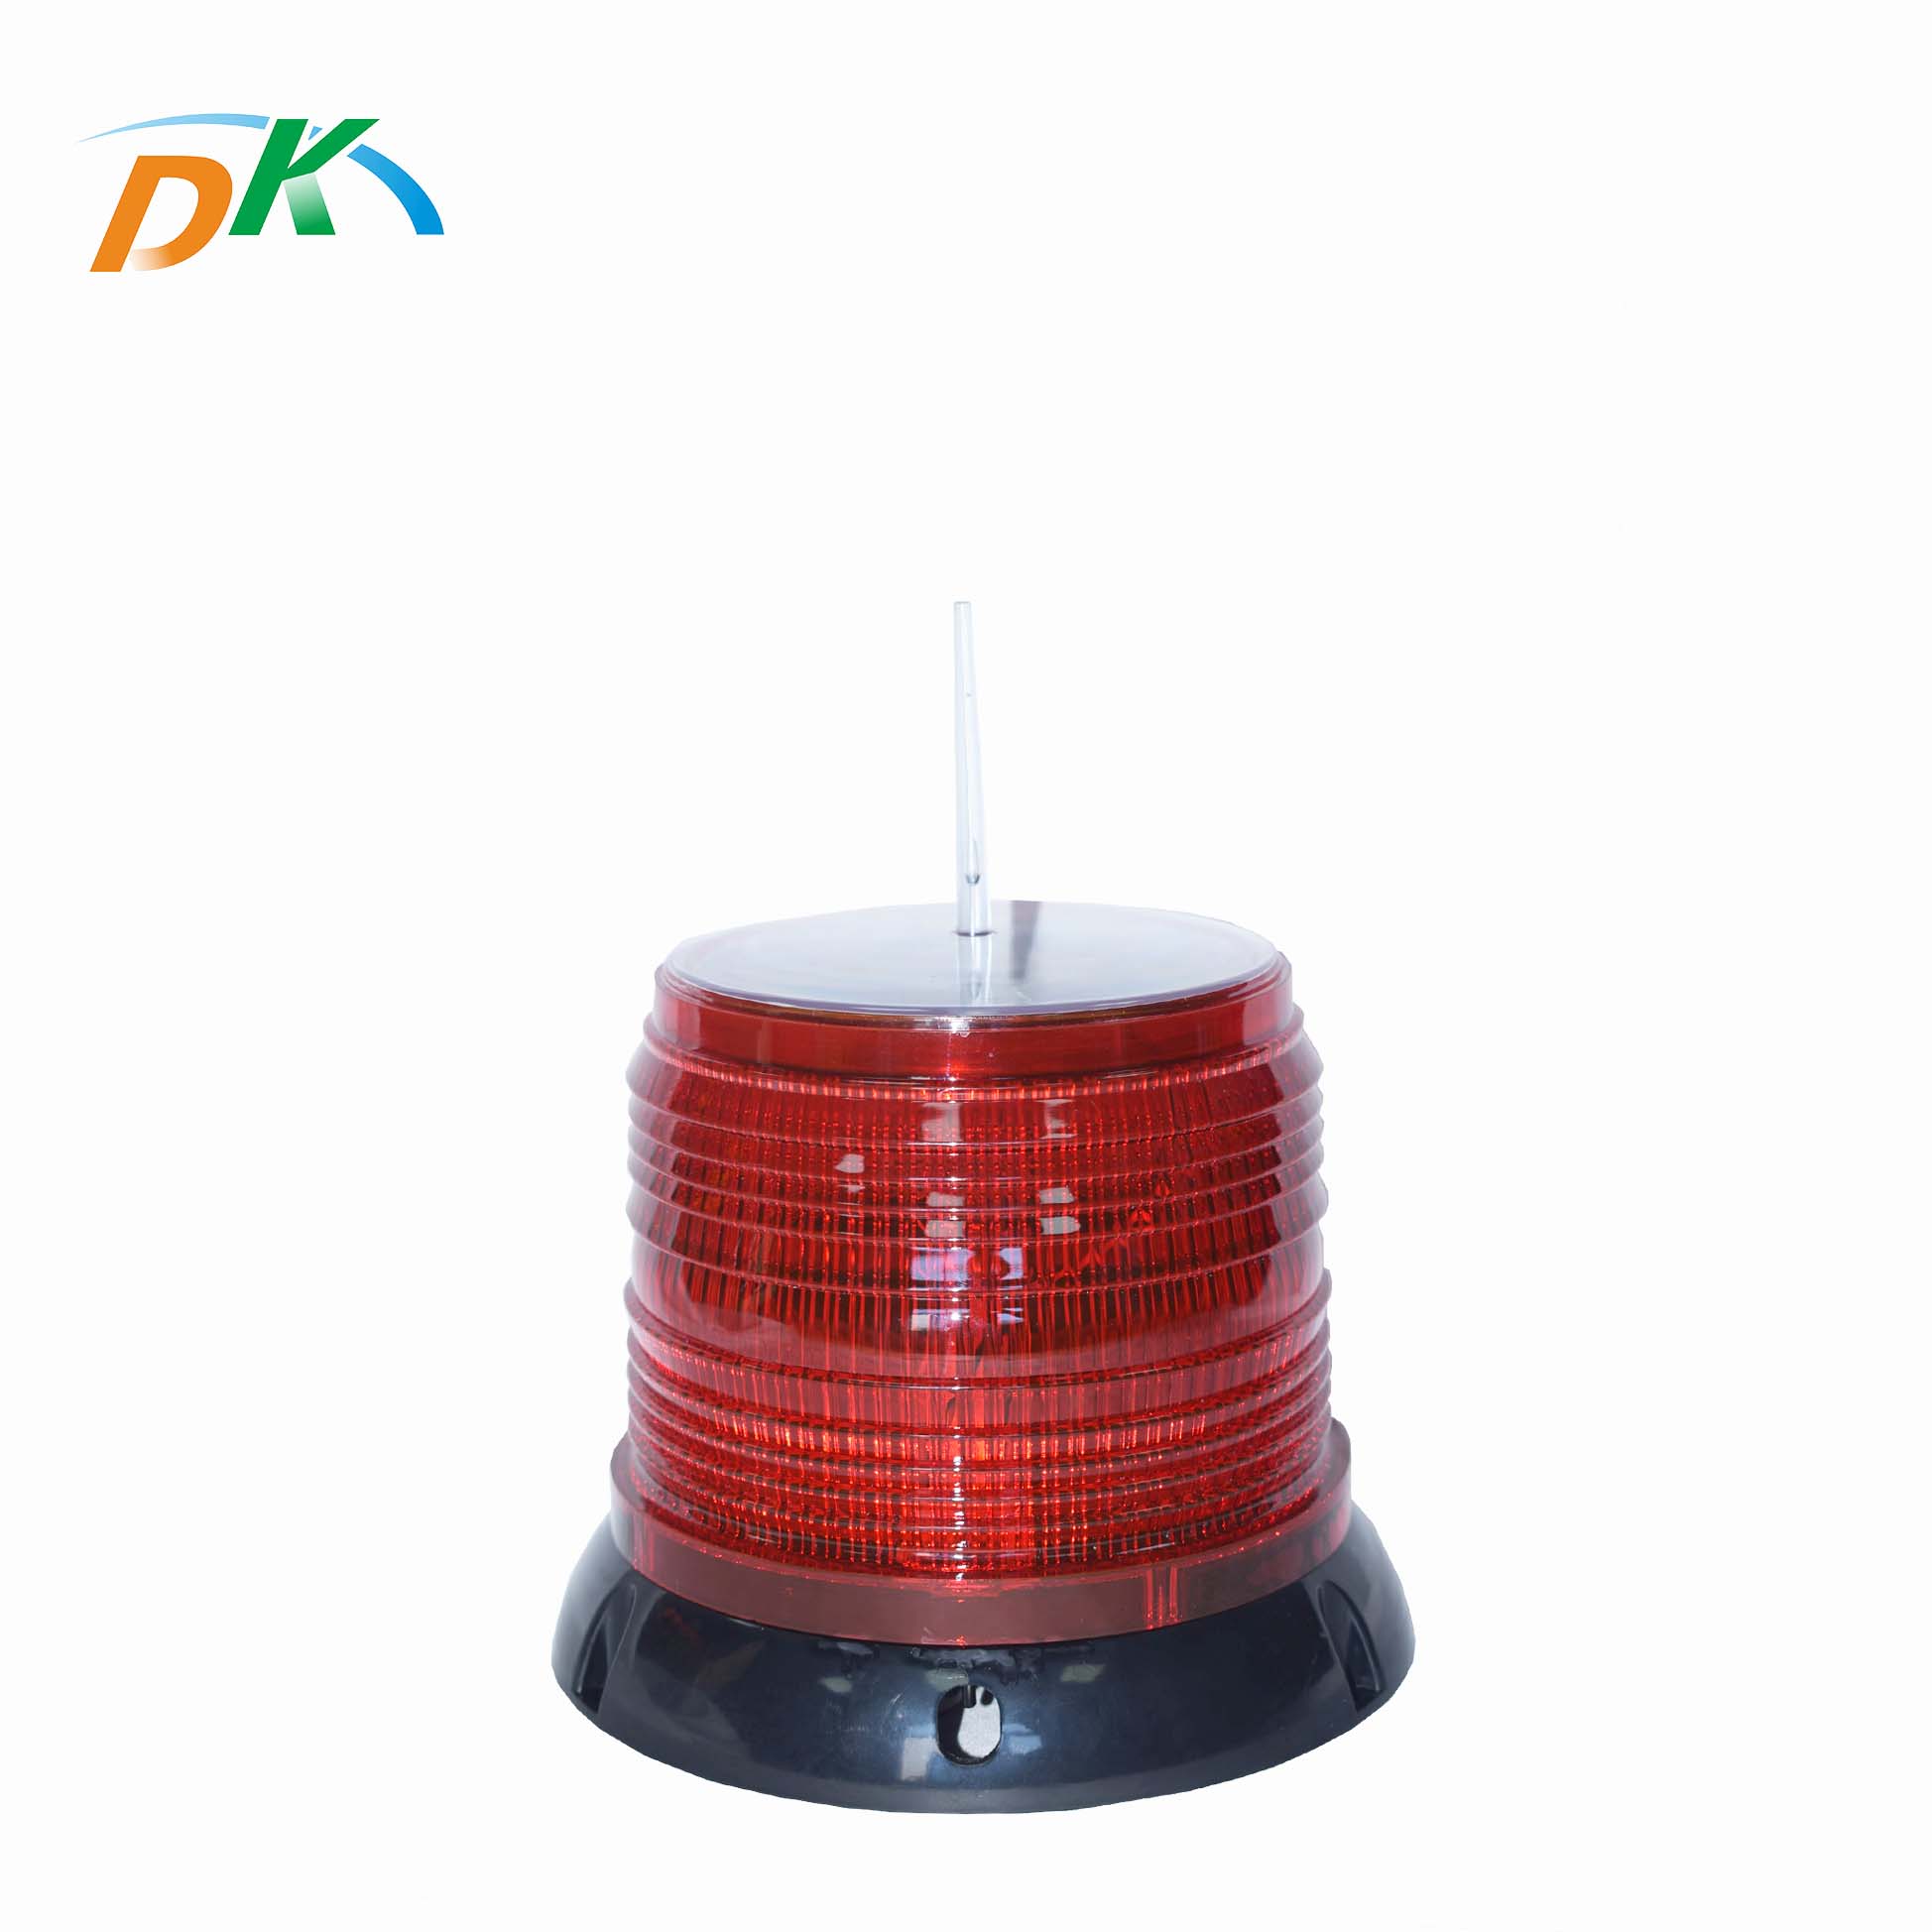 DK LED New Product outdoor solar energy building safety aviation warning light